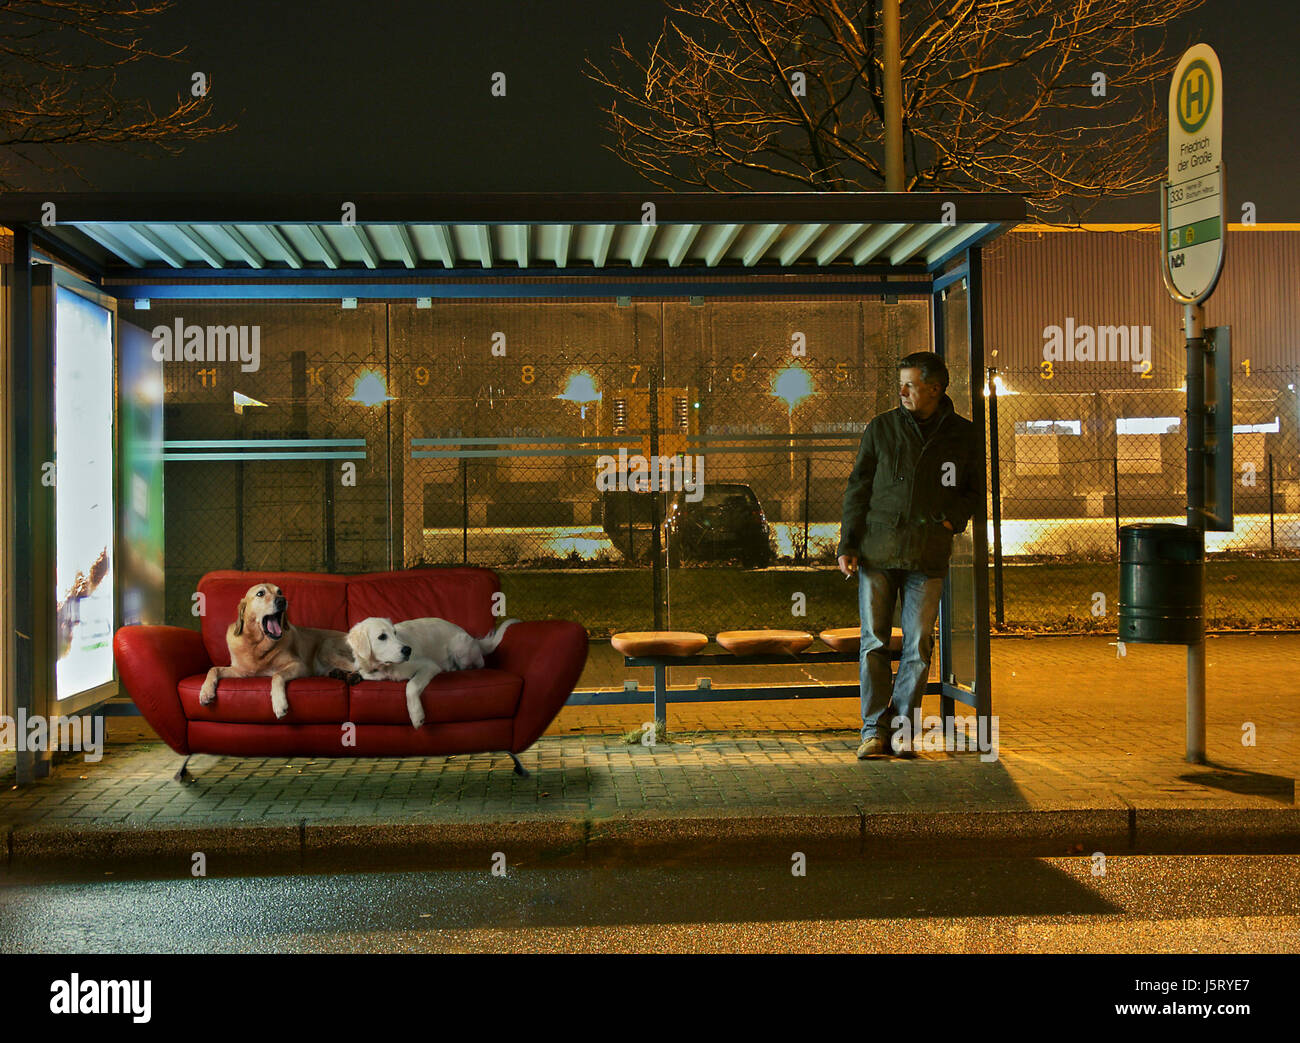 pet night photograph human human being pets dog bus stop dogs photo composition Stock Photo